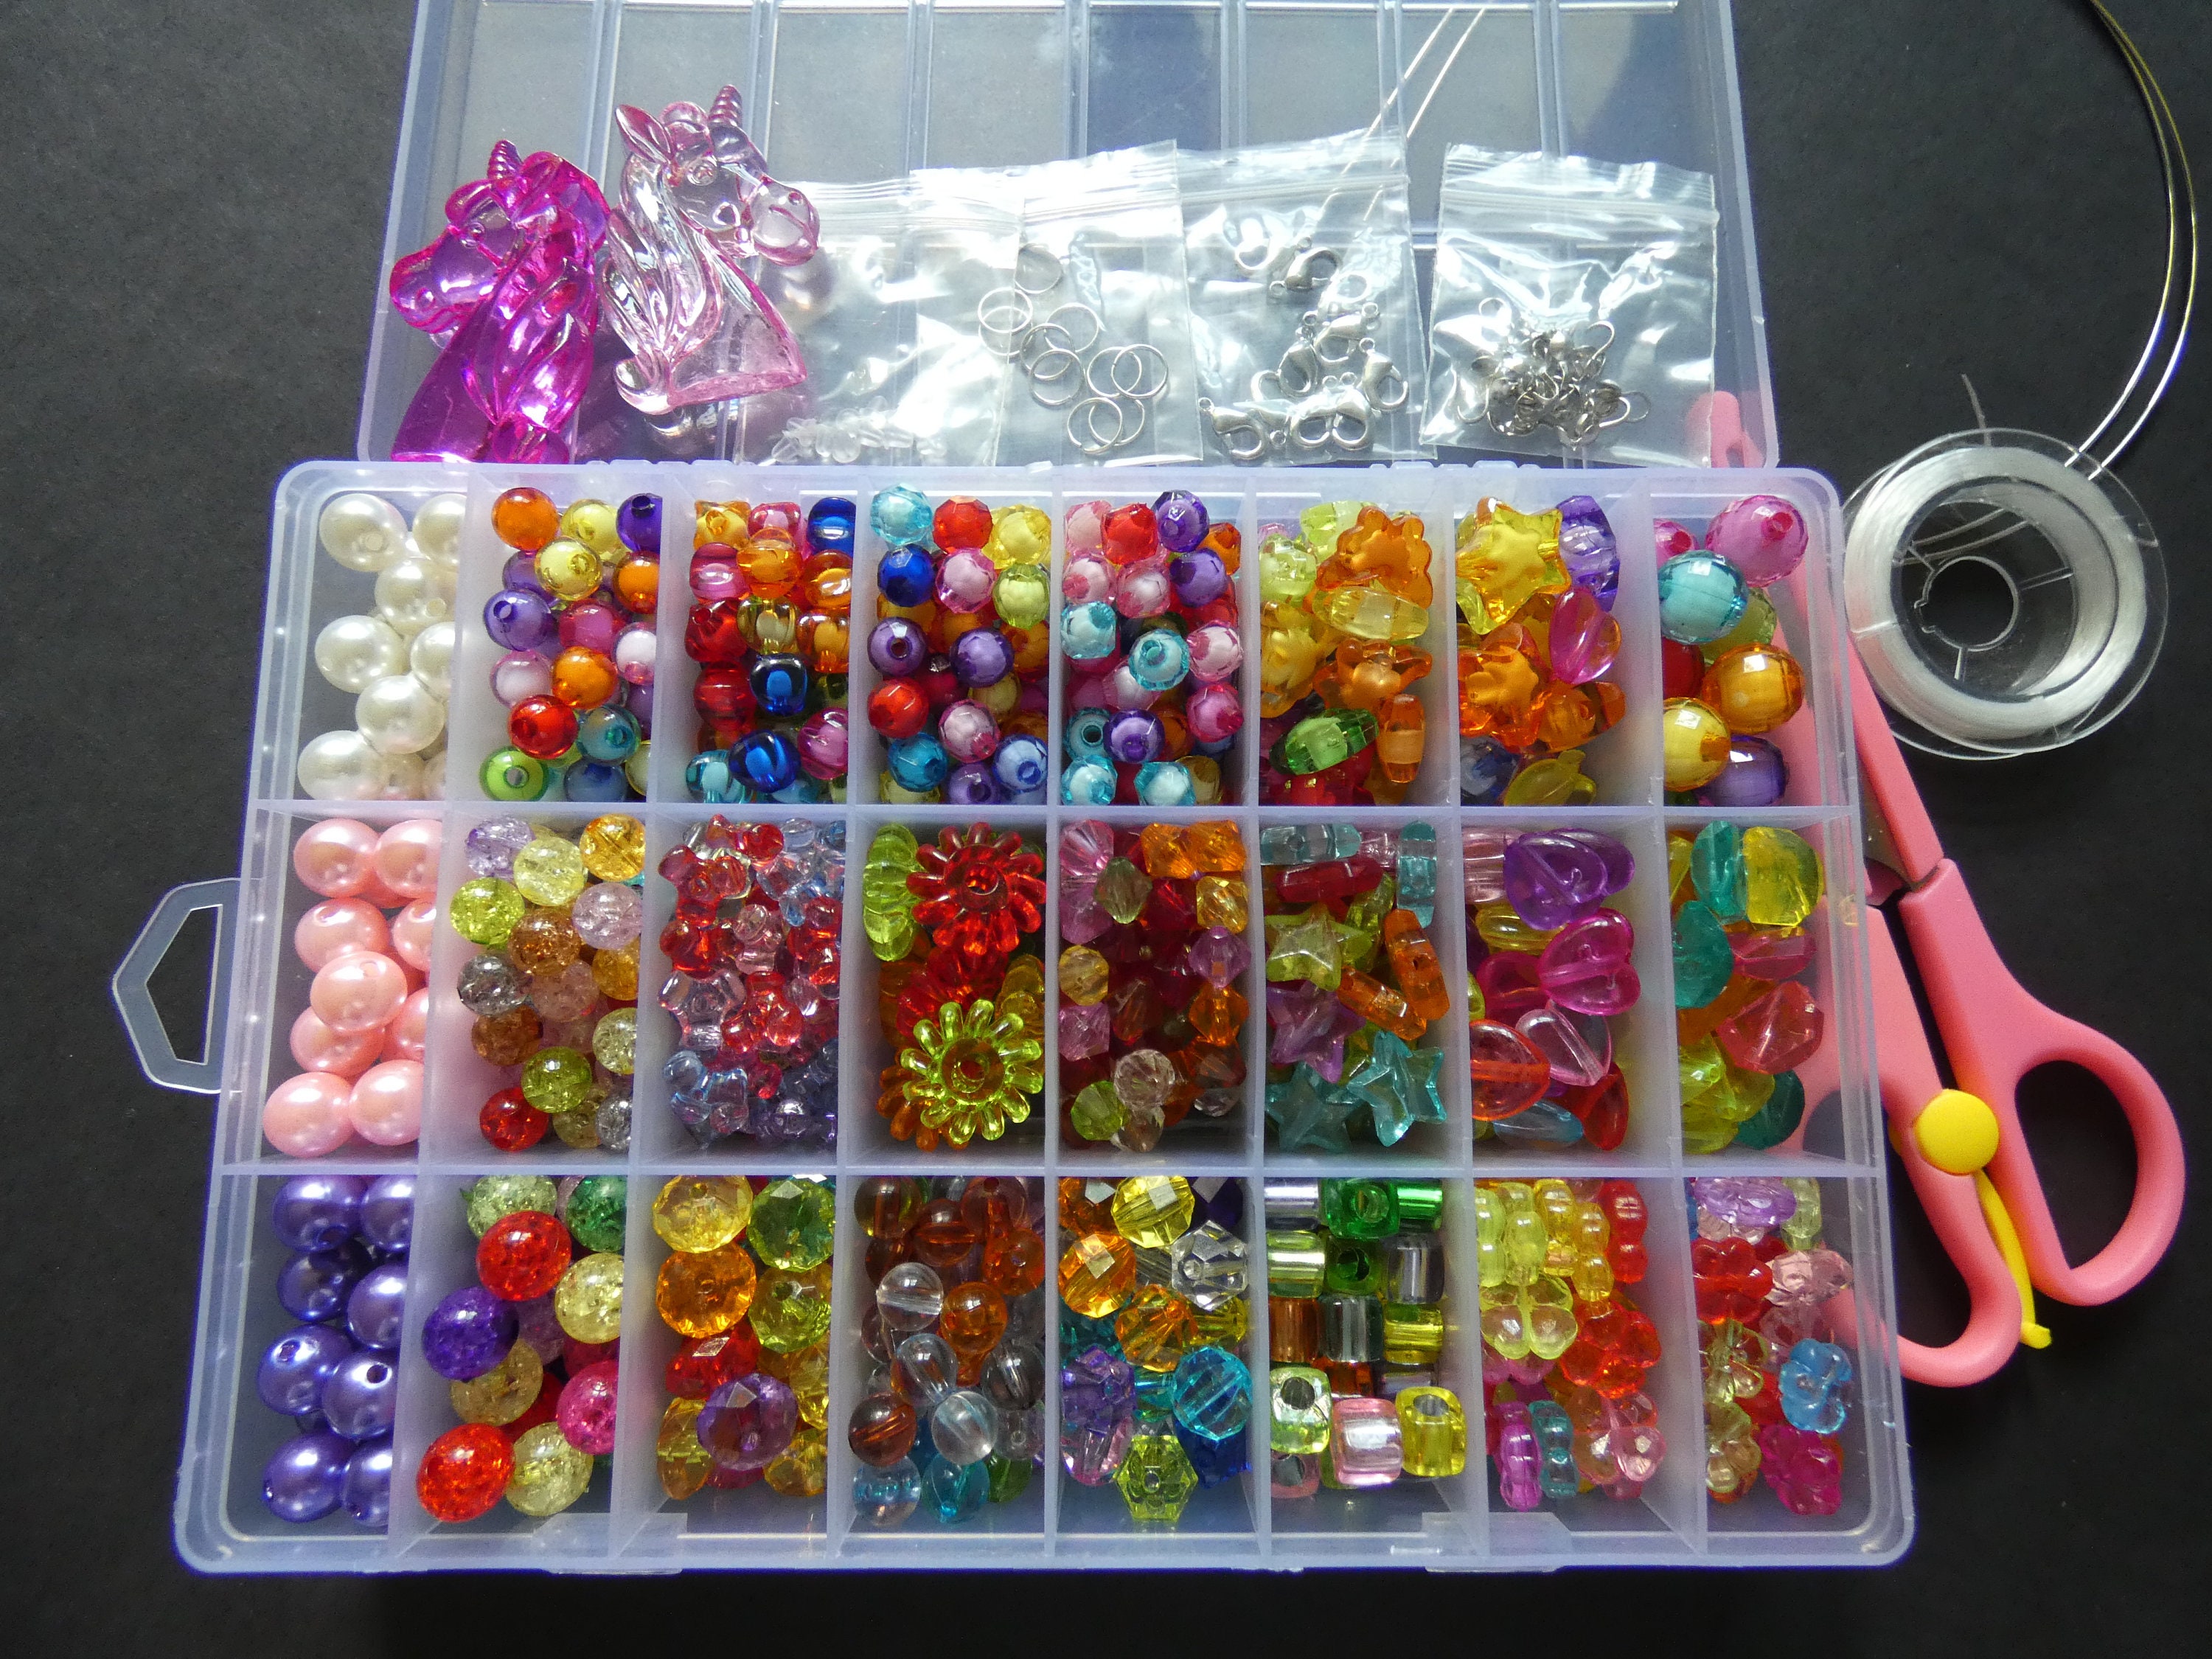 1,200 Piece Acrylic Bead Kit With Organizer Case, 24 Different Bead Styles,  Jewelry Making Set With Scissors, Findings & More, DIY Beading 